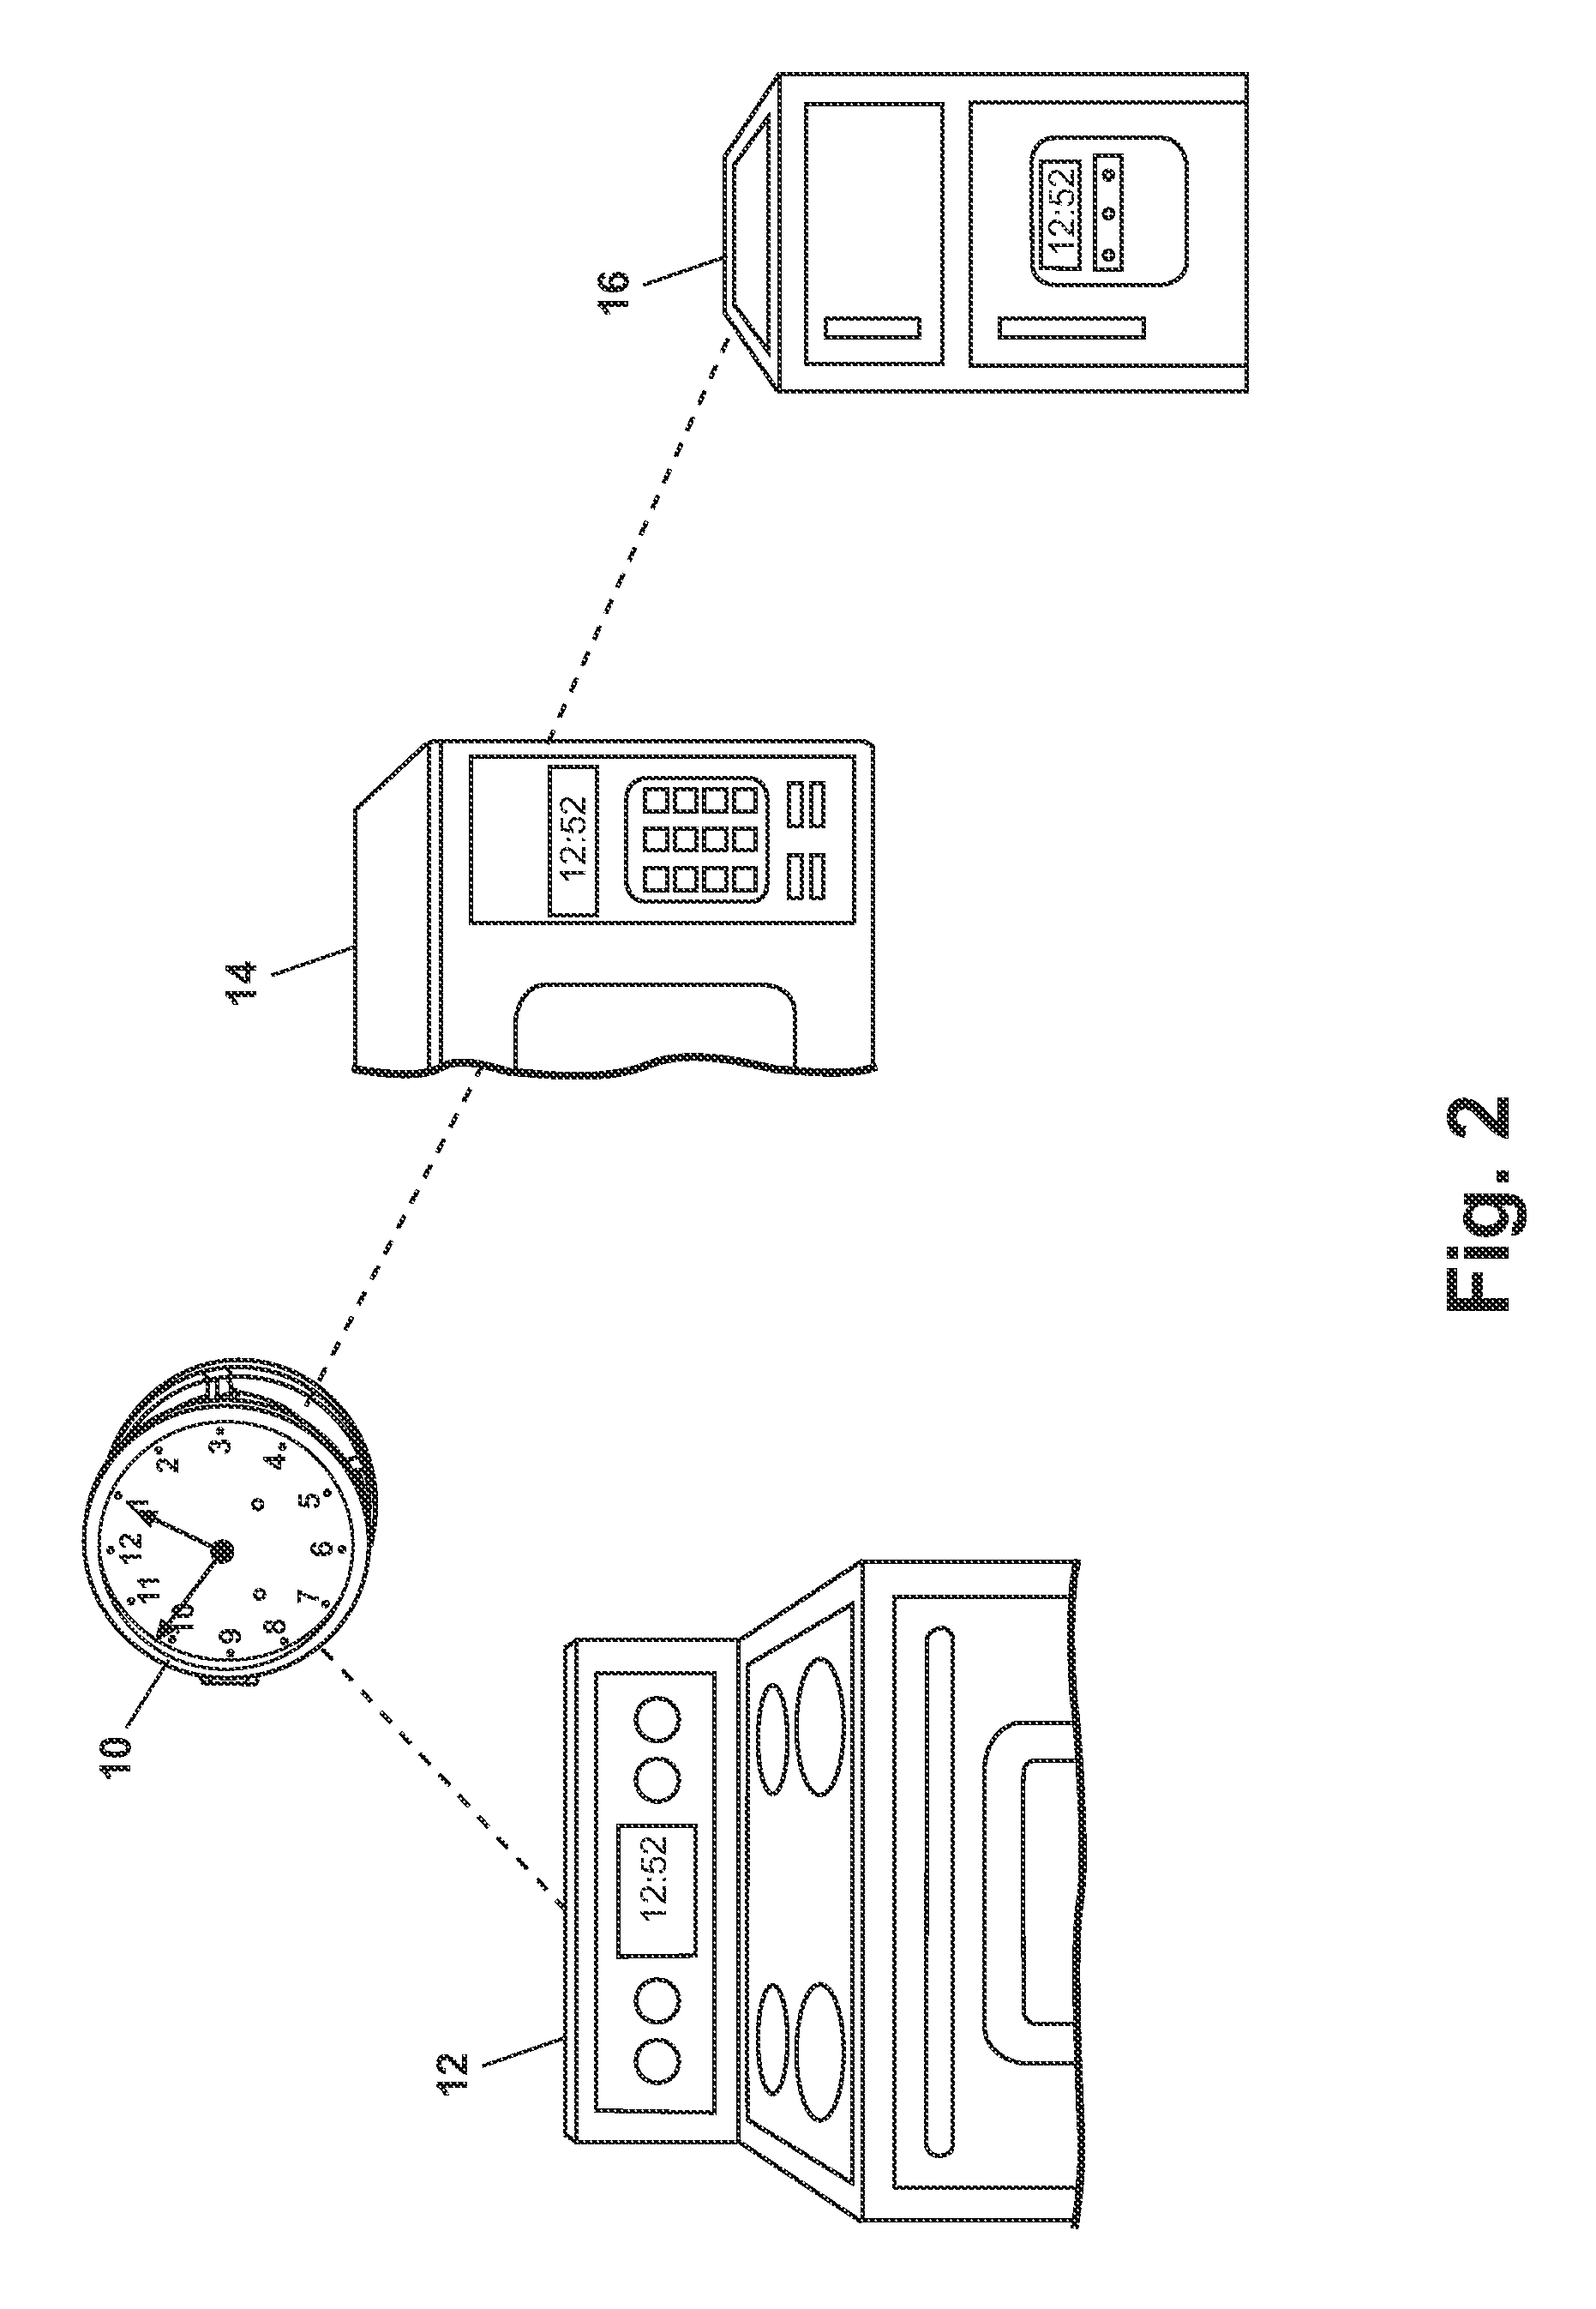 Network for communicating information related to a consumable to an appliance